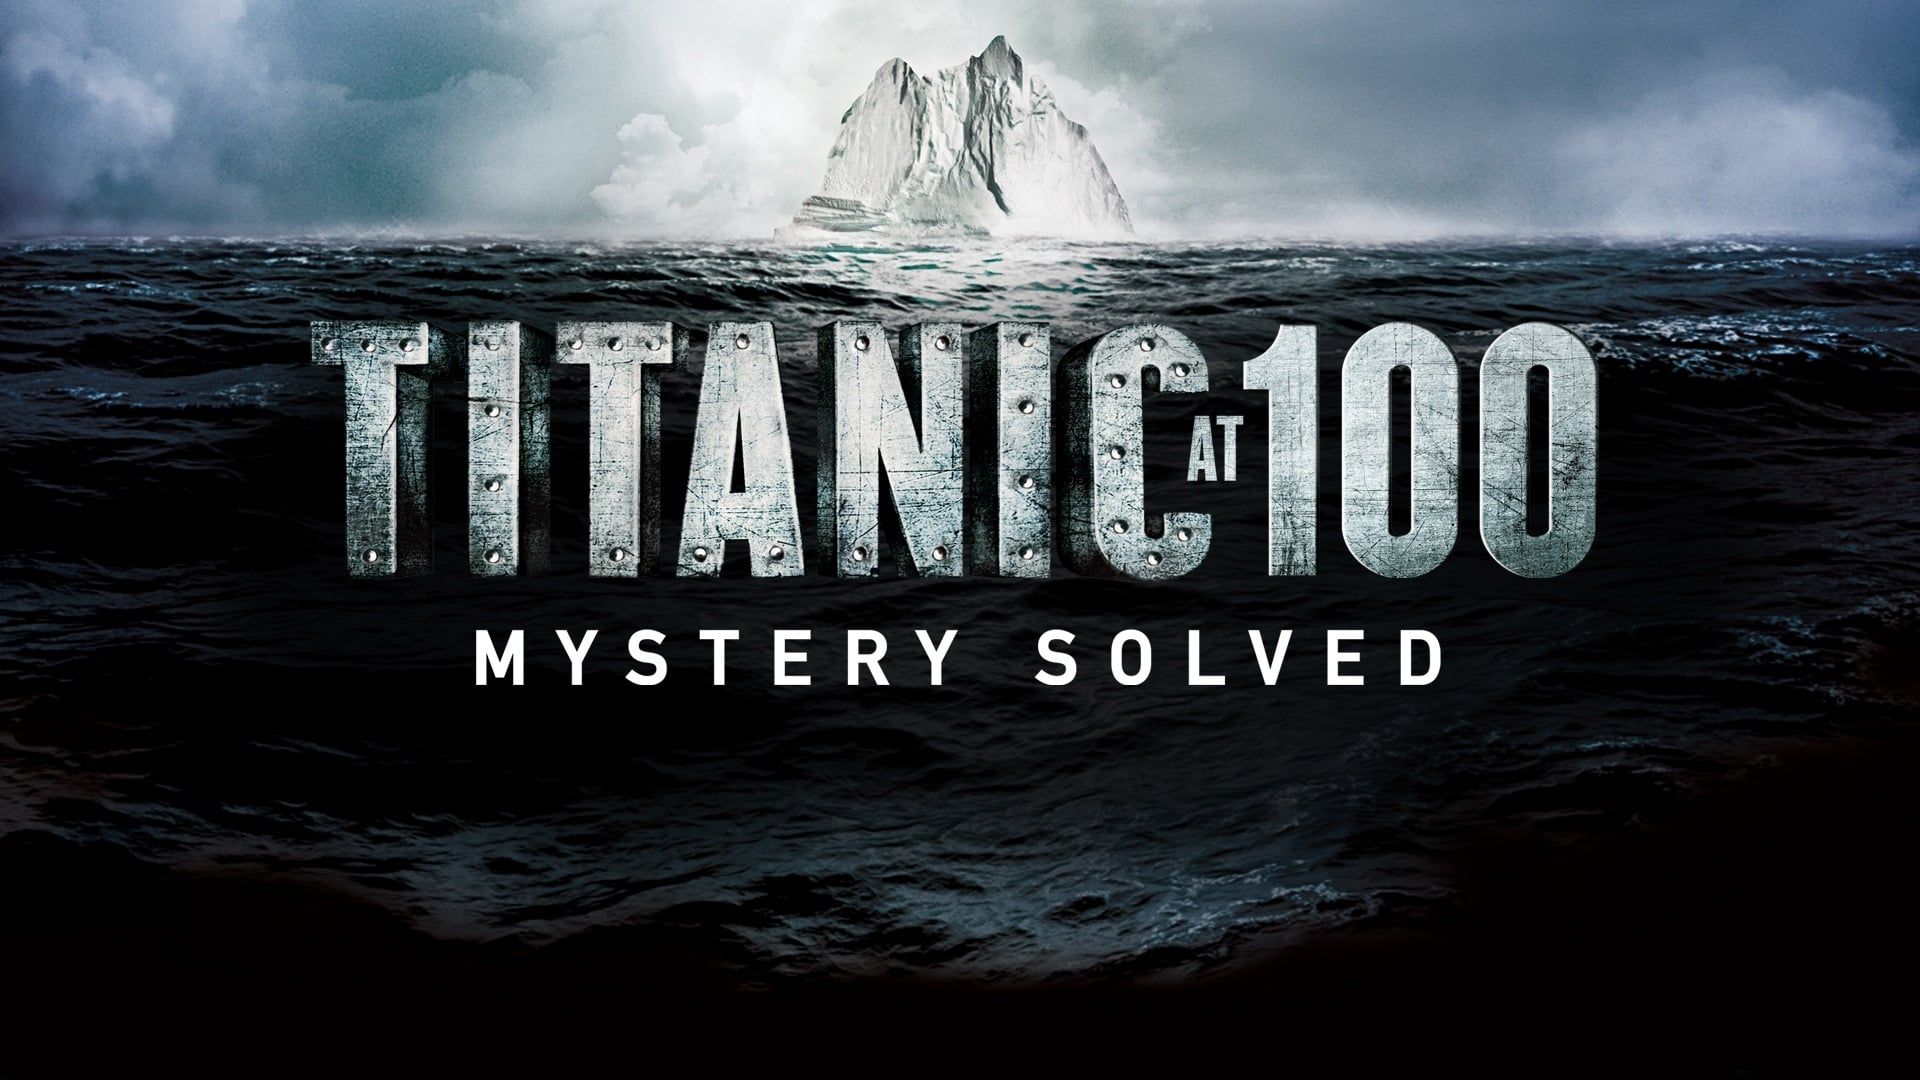 Titanic at 100: Mystery Solved background